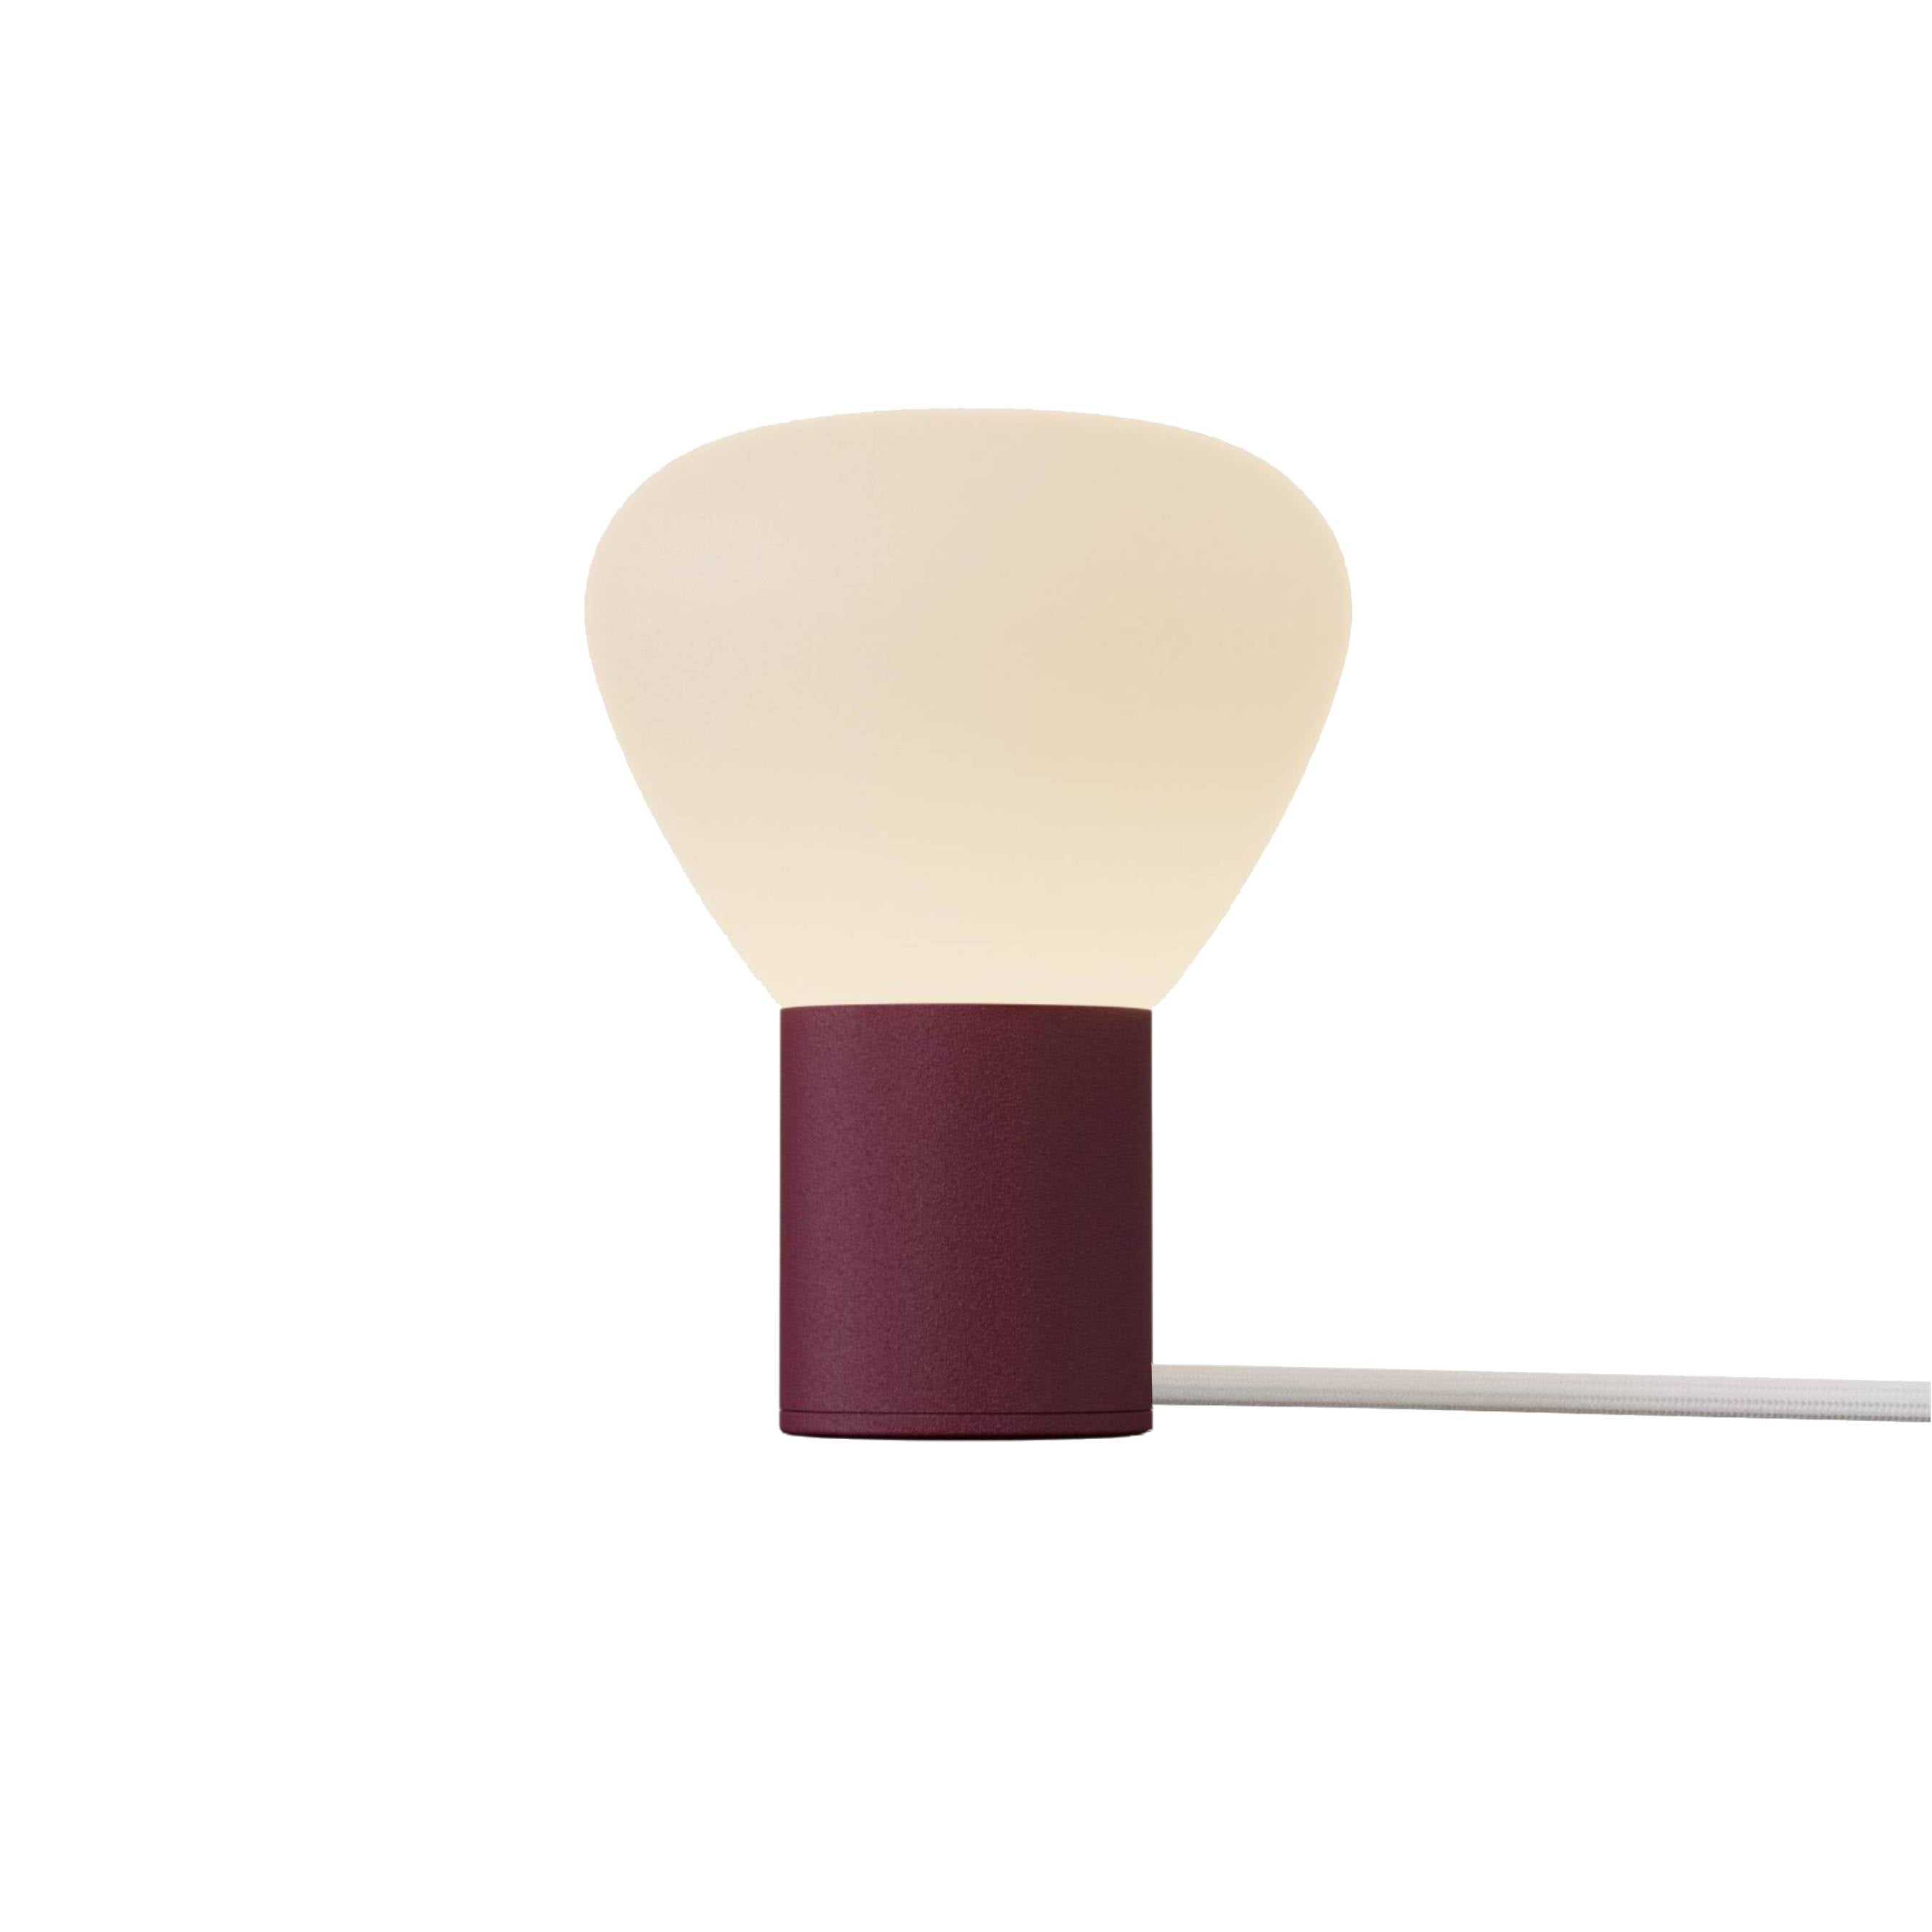 Parc 01 Table Lamp: Footswitch +  Burgundy + White